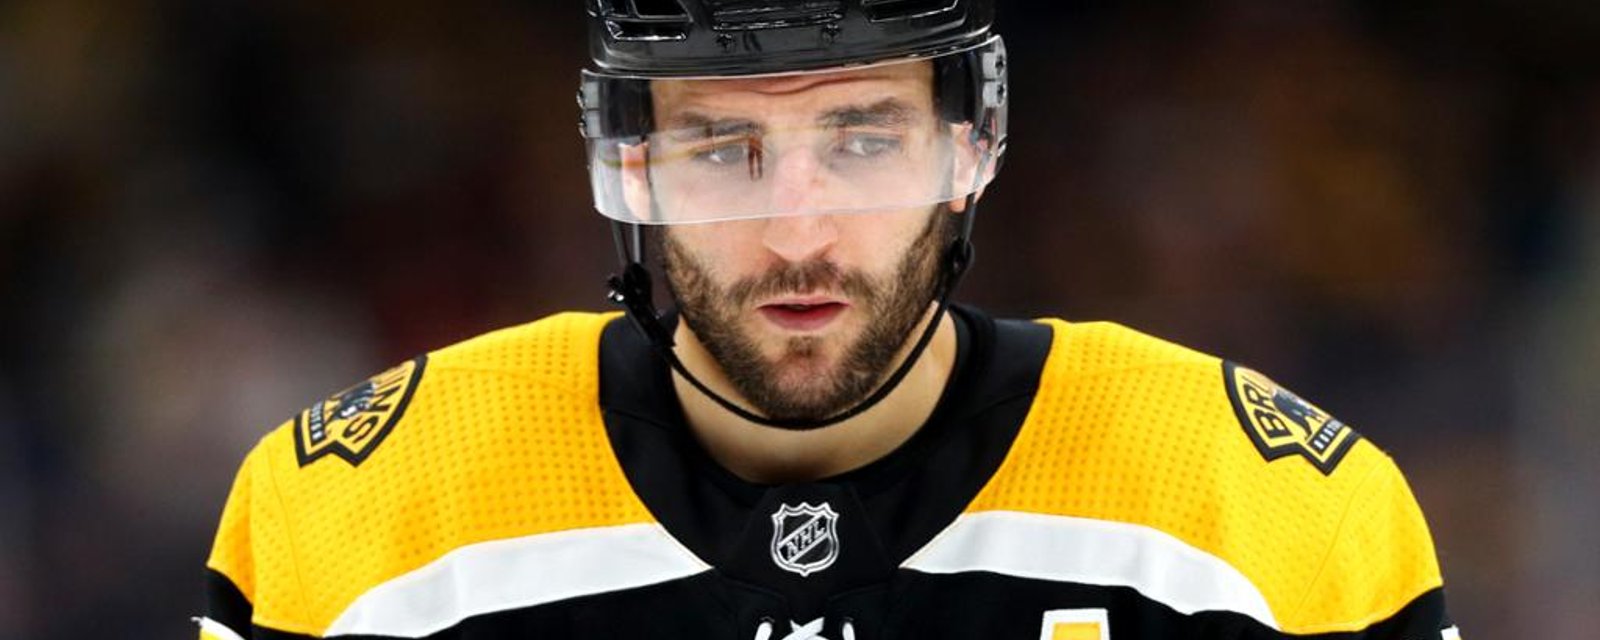 Patrice Bergeron expected to bust the Perfection Line next season